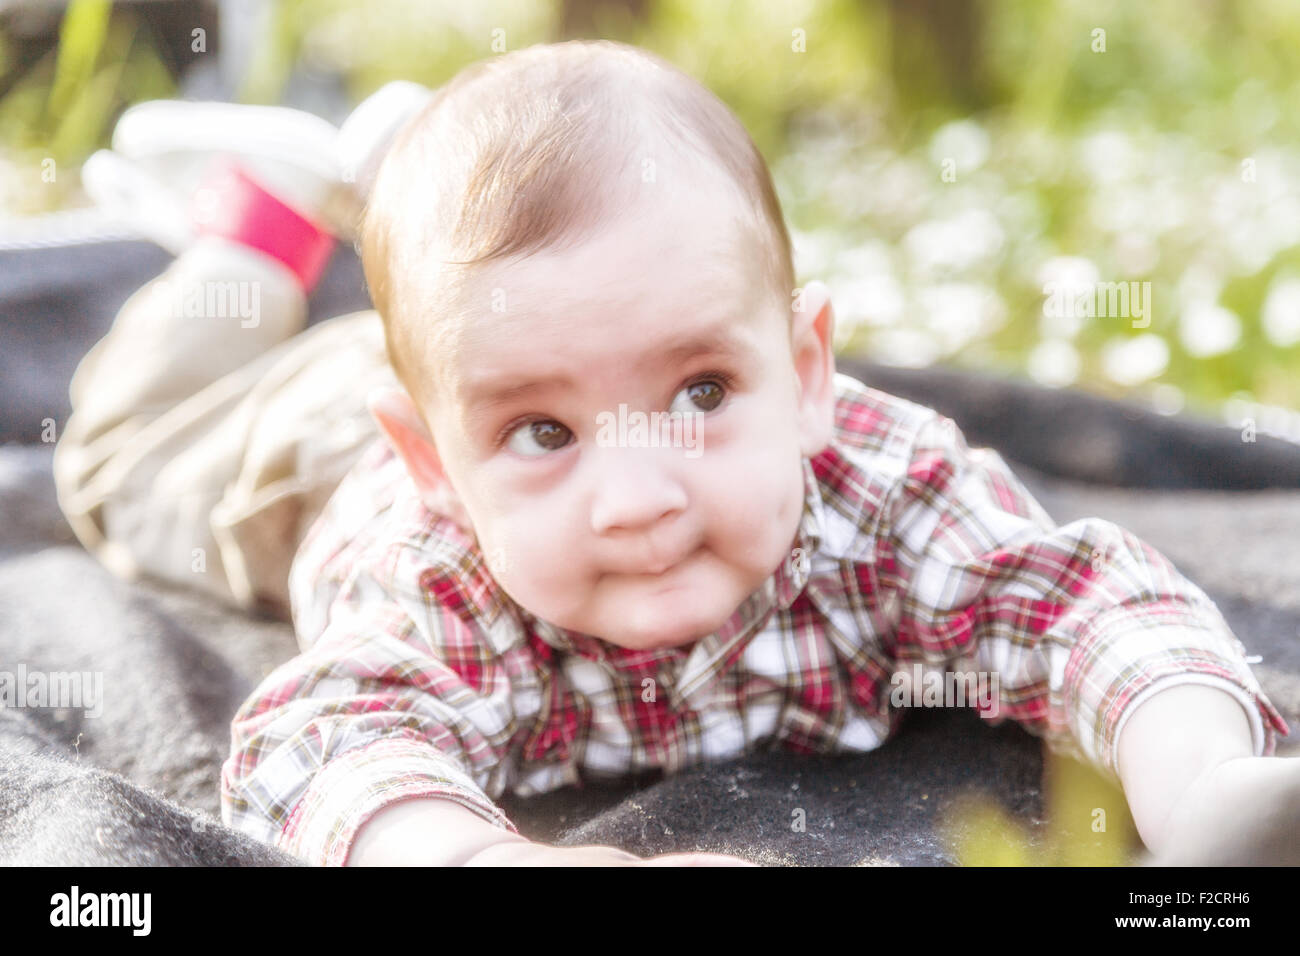 Funny face of cute 6 months old baby with Light brown hair in red checkered shirt and beige pants: he's biting his lips and puffing cheeks Stock Photo